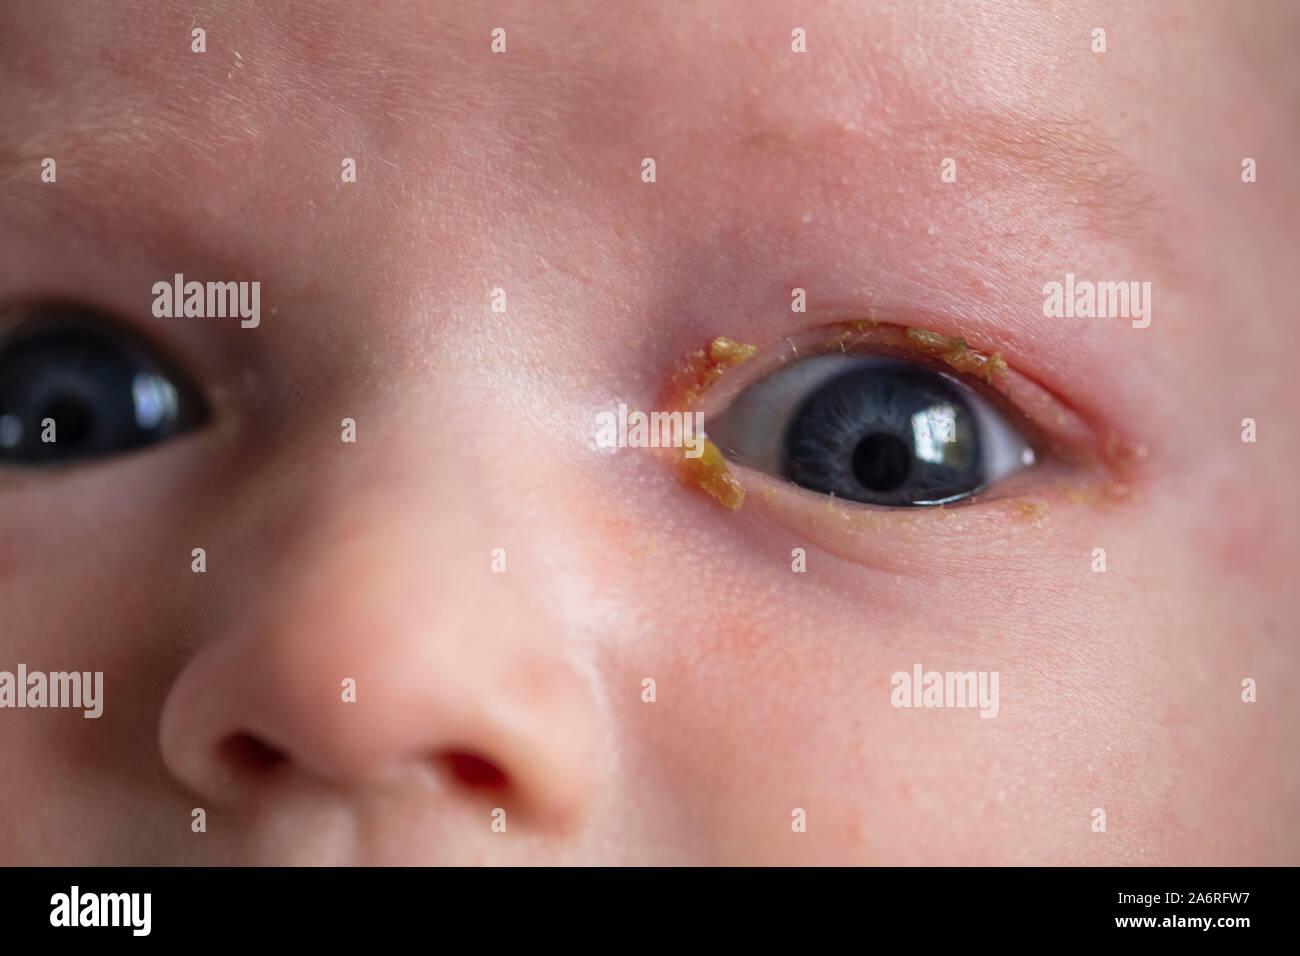 A close up of a young baby with a common sore sticky eye infection Stock Photo